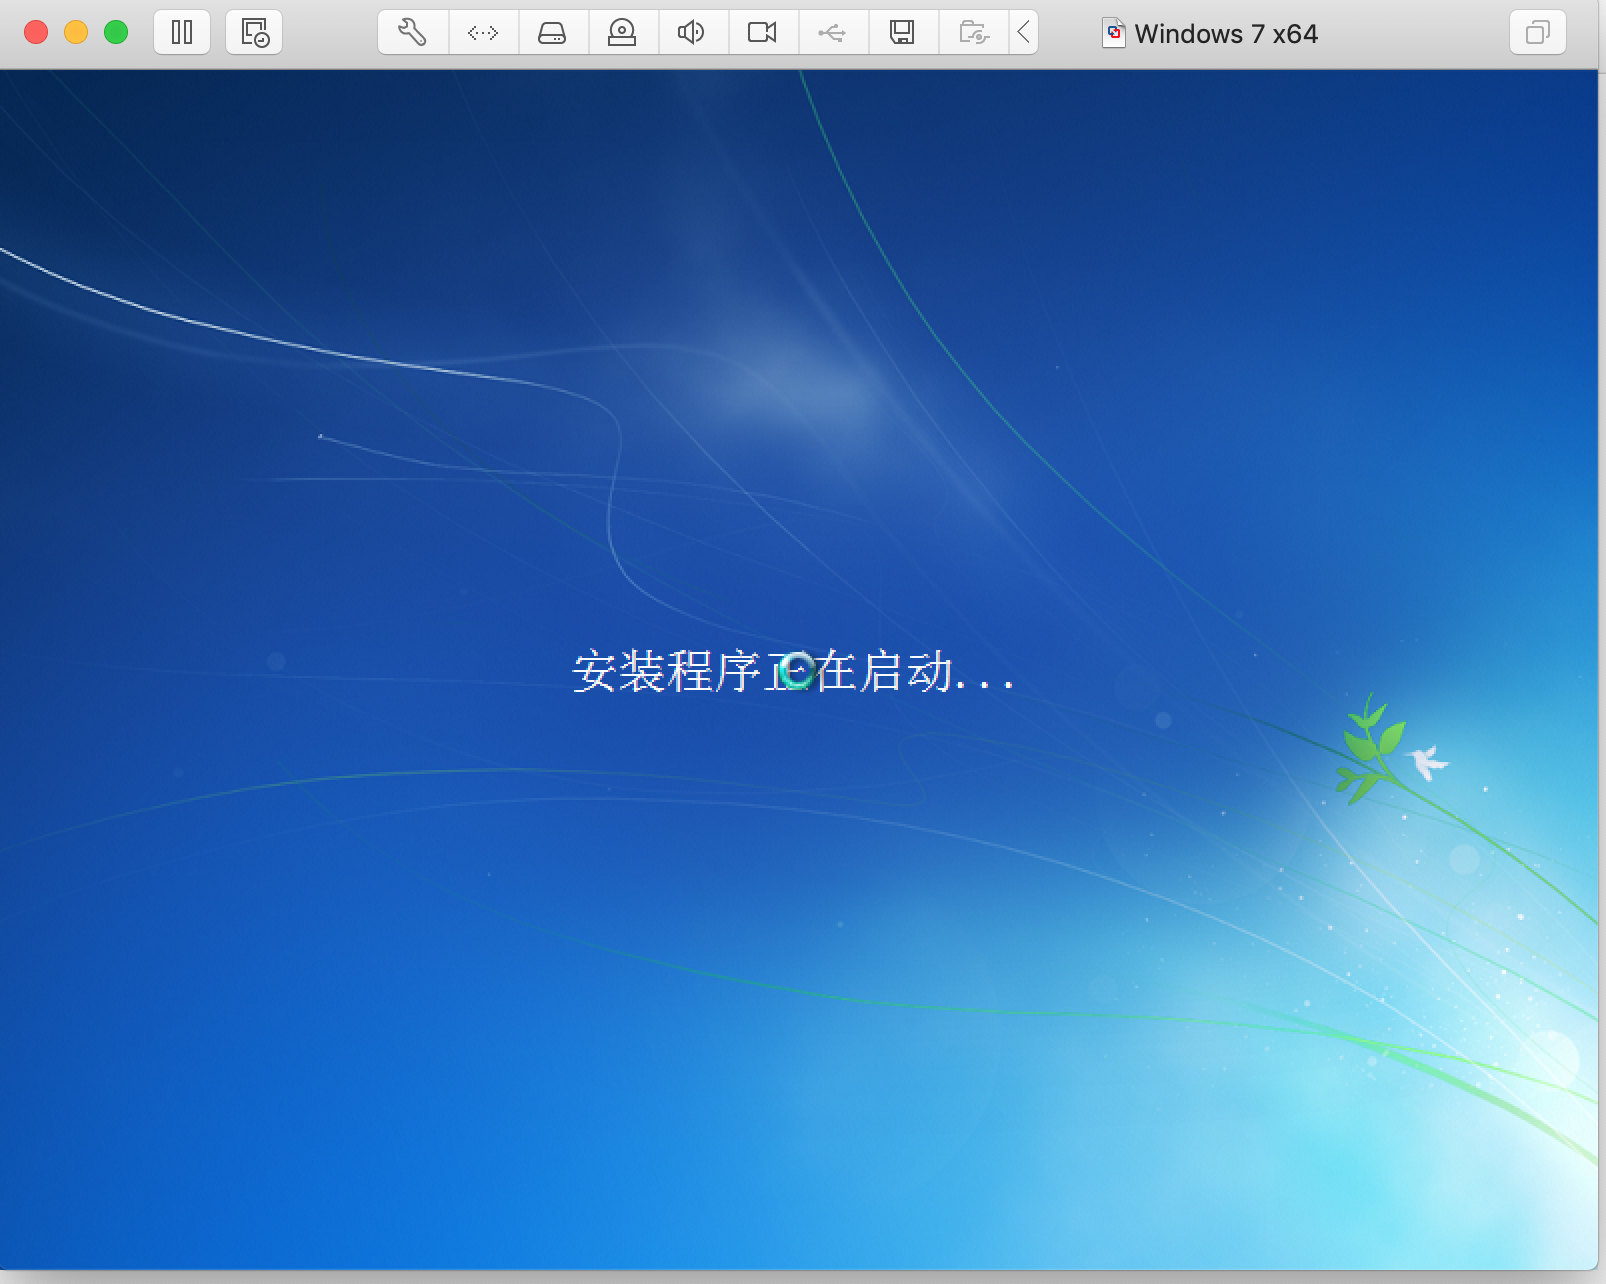 os-win7-new-init.png